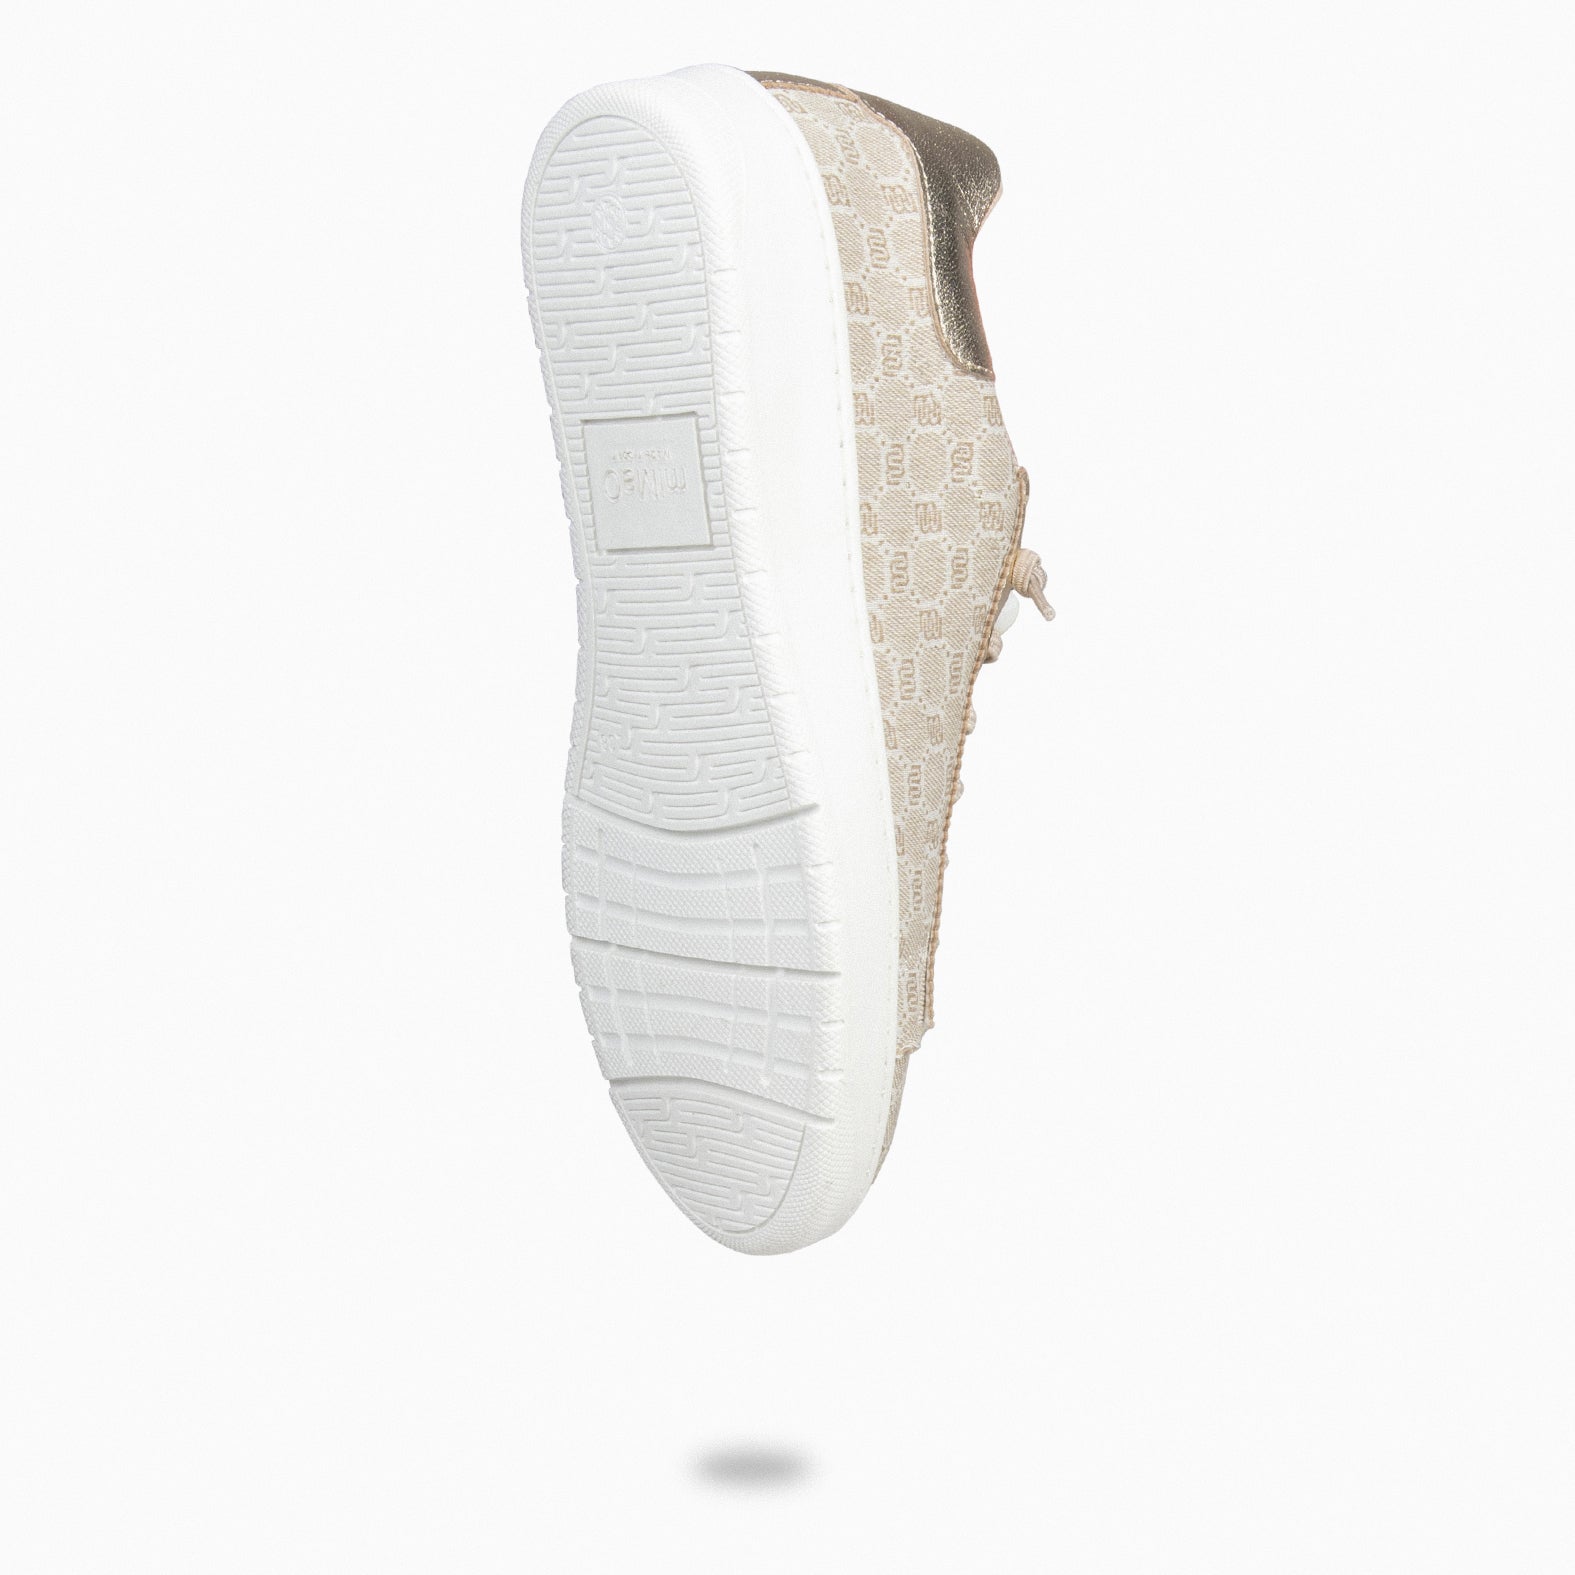 TOULOUSE - BEIGE SNEAKERS WITH ELASTIC LACES